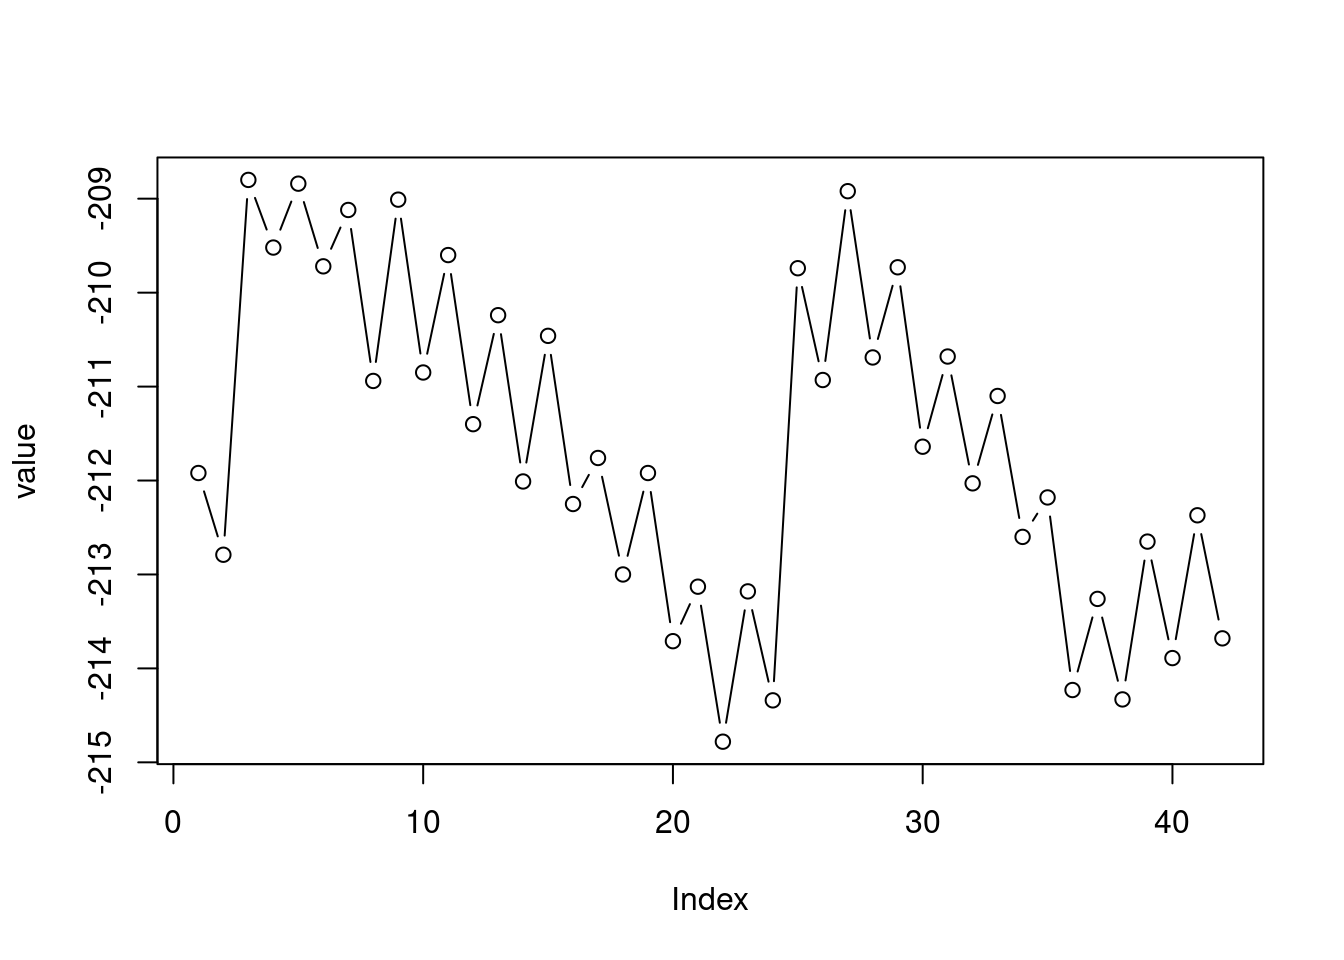 Plot of the `value` vector